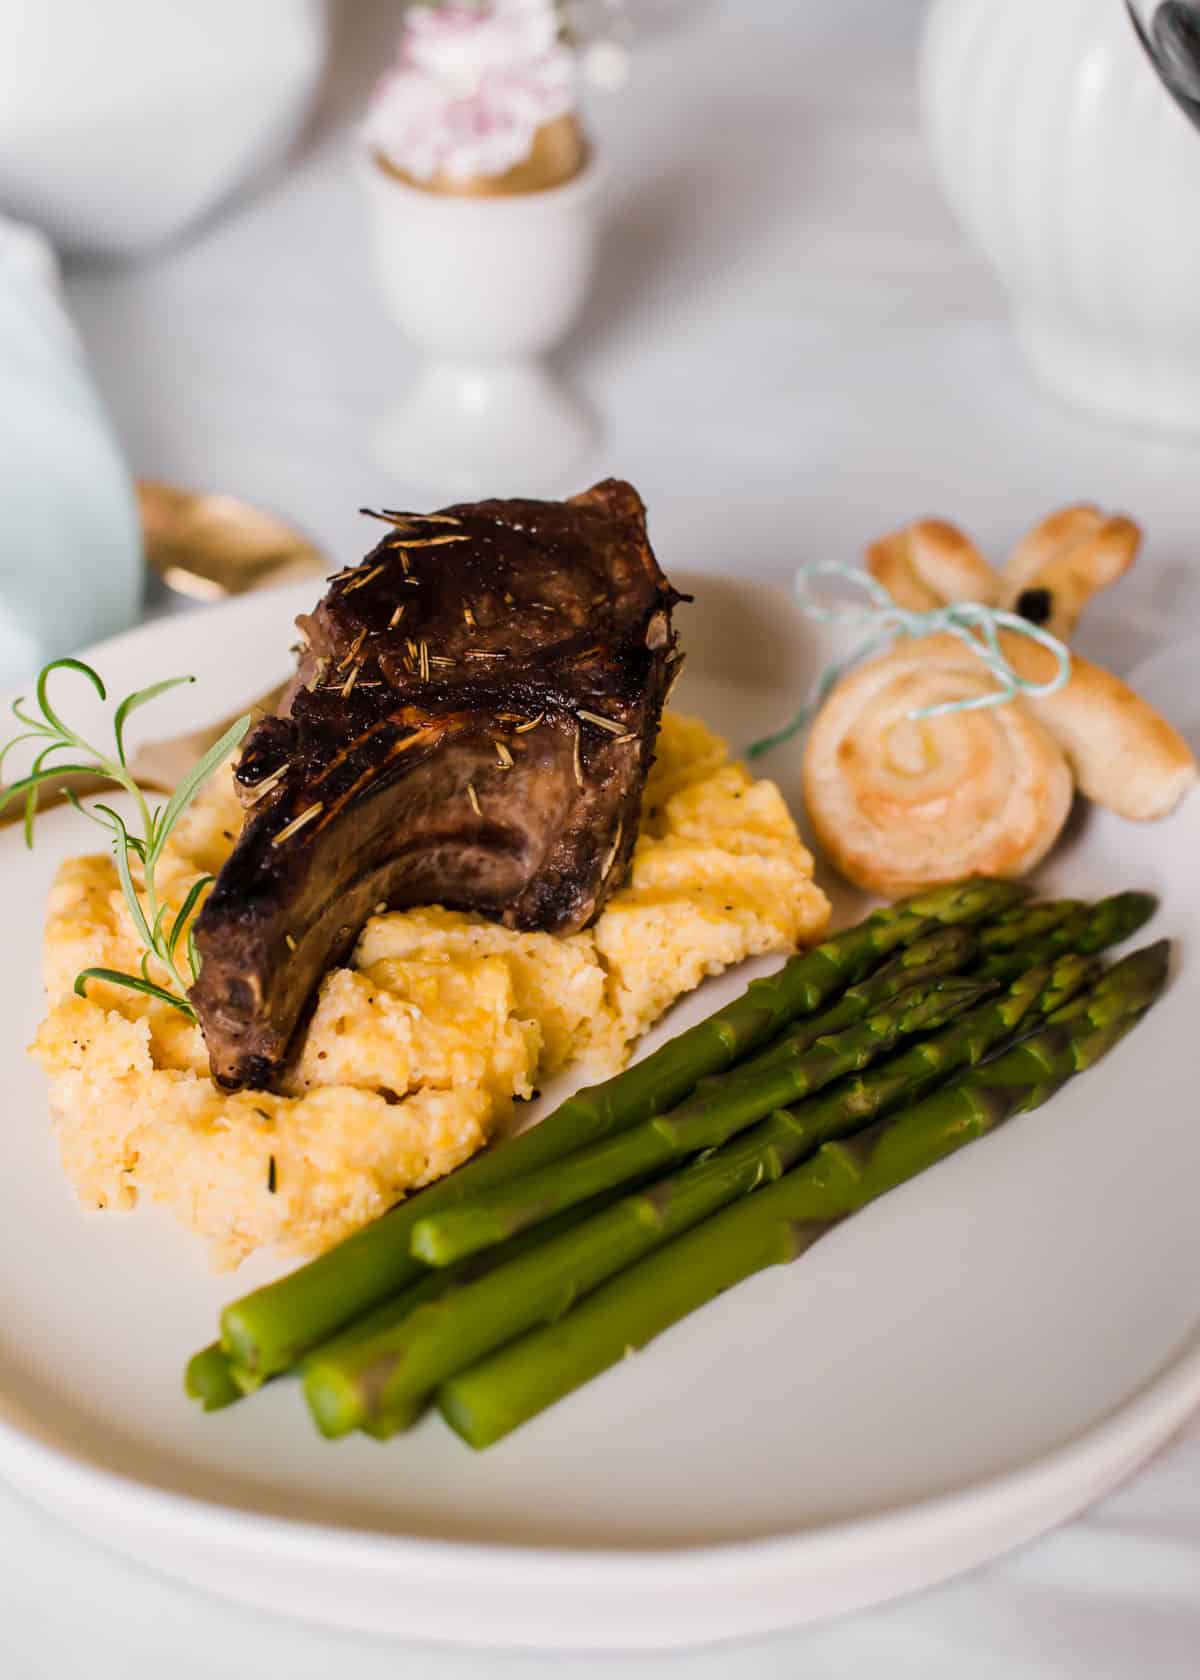 dinner plate with lamb chops, polenta and asparagus.